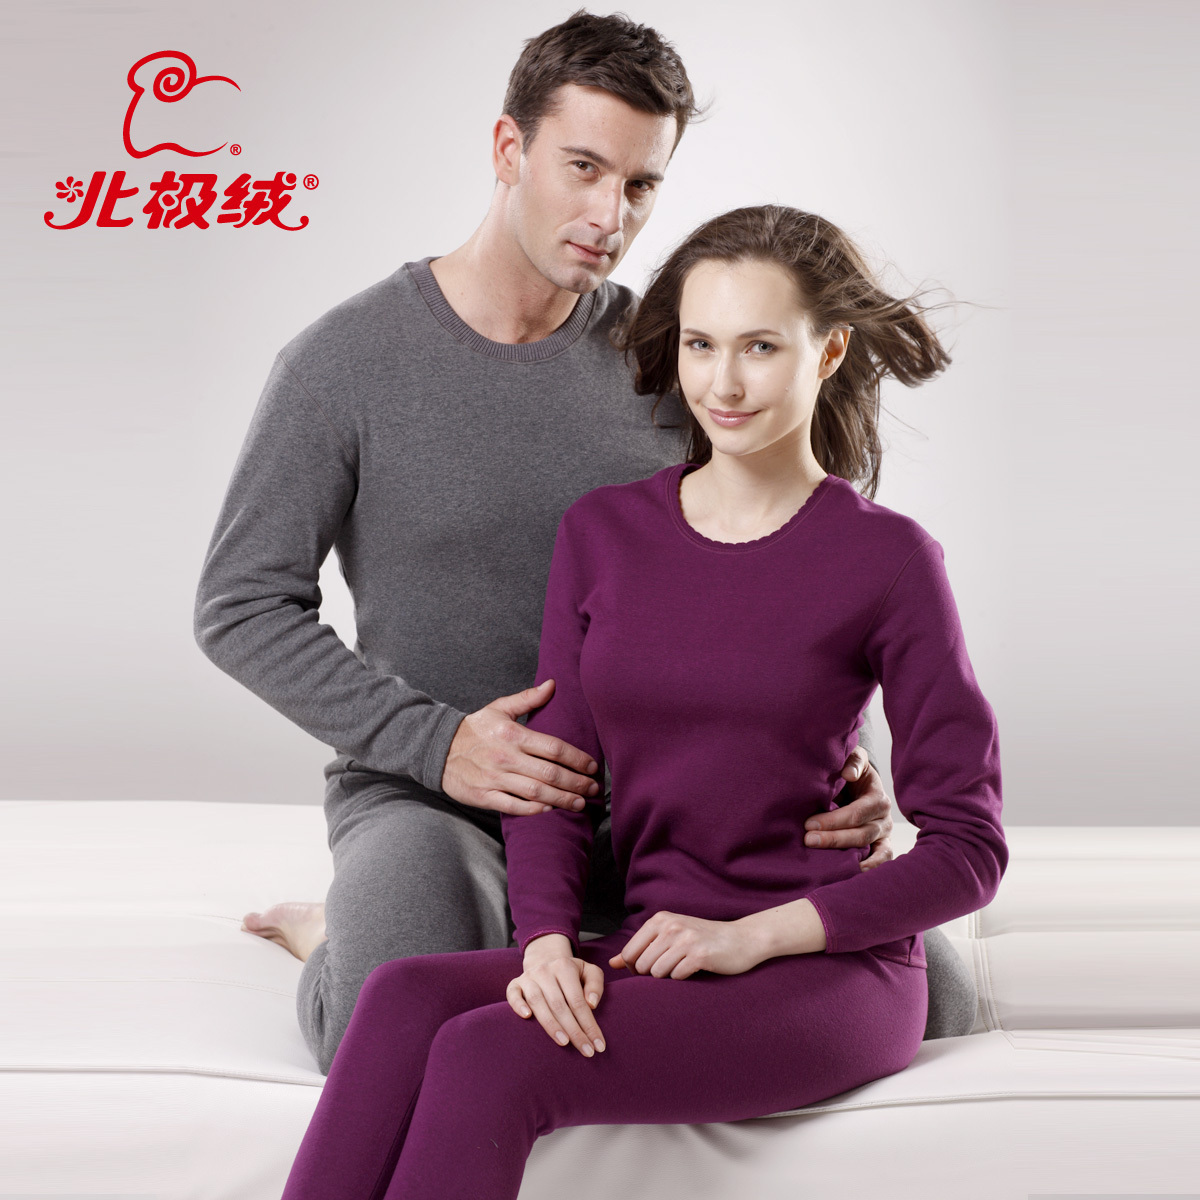 BJR Wool magnetic therapy plus velvet thickening thermal underwear male women's set thermal clothing 1 set